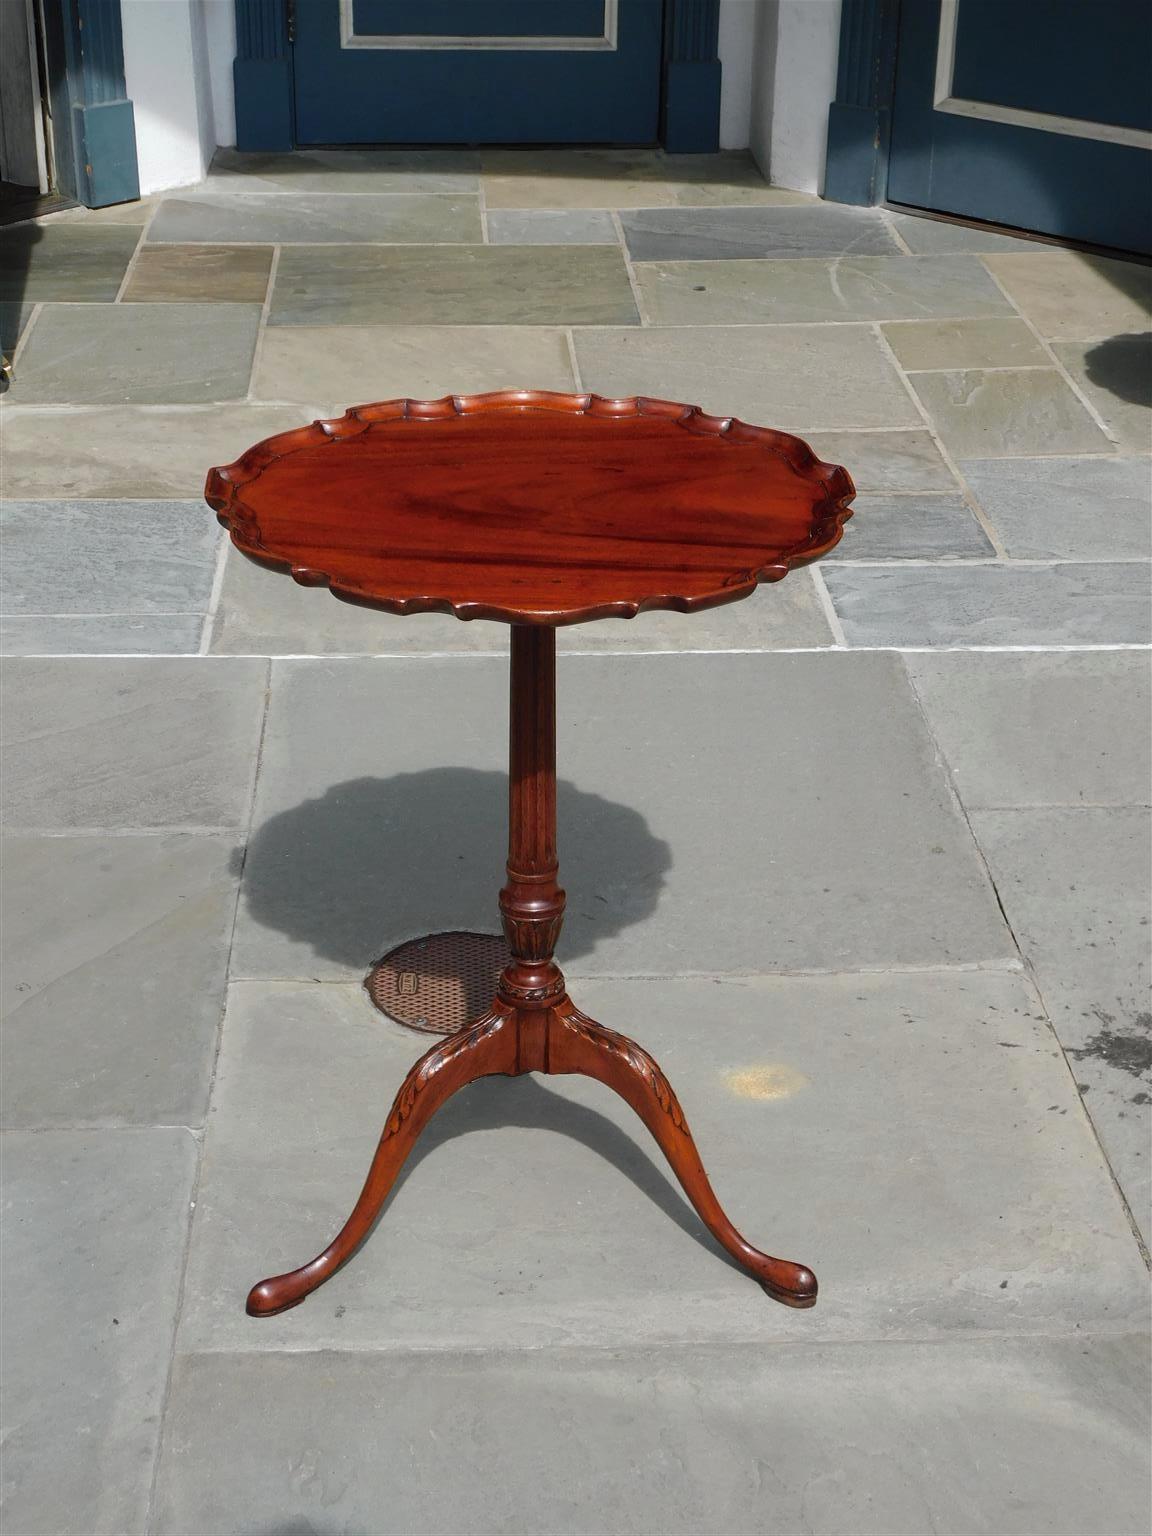 American chippendale mahogany pie crust tilt top kettle stand with fluted urn center column, original brass banjo locking mechanism, and resting on carved acanthus legs with slipper feet, Mid 18th century